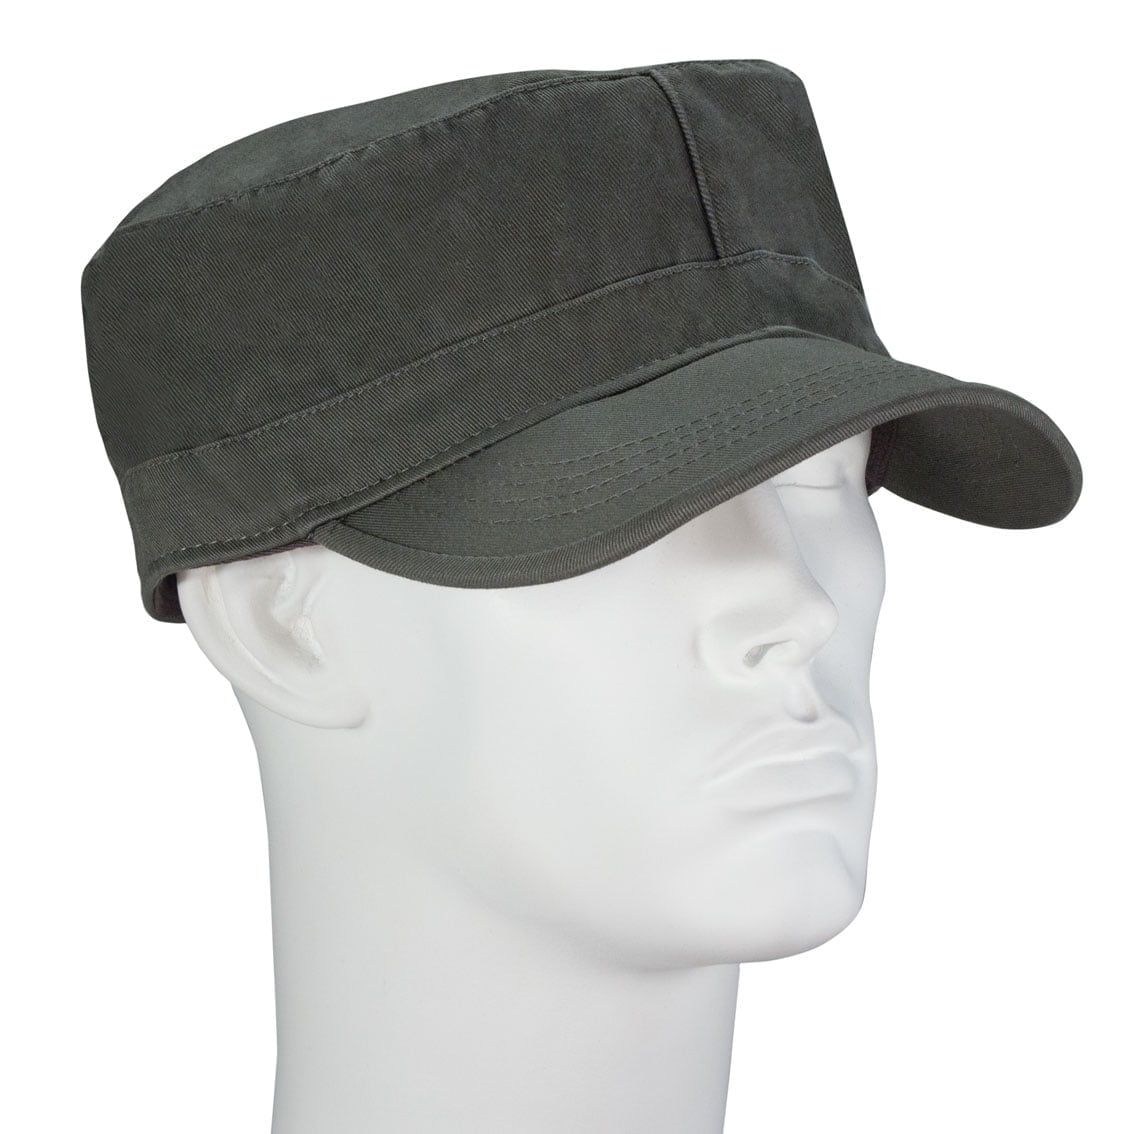 Olive Army HAT - Dozen Packed